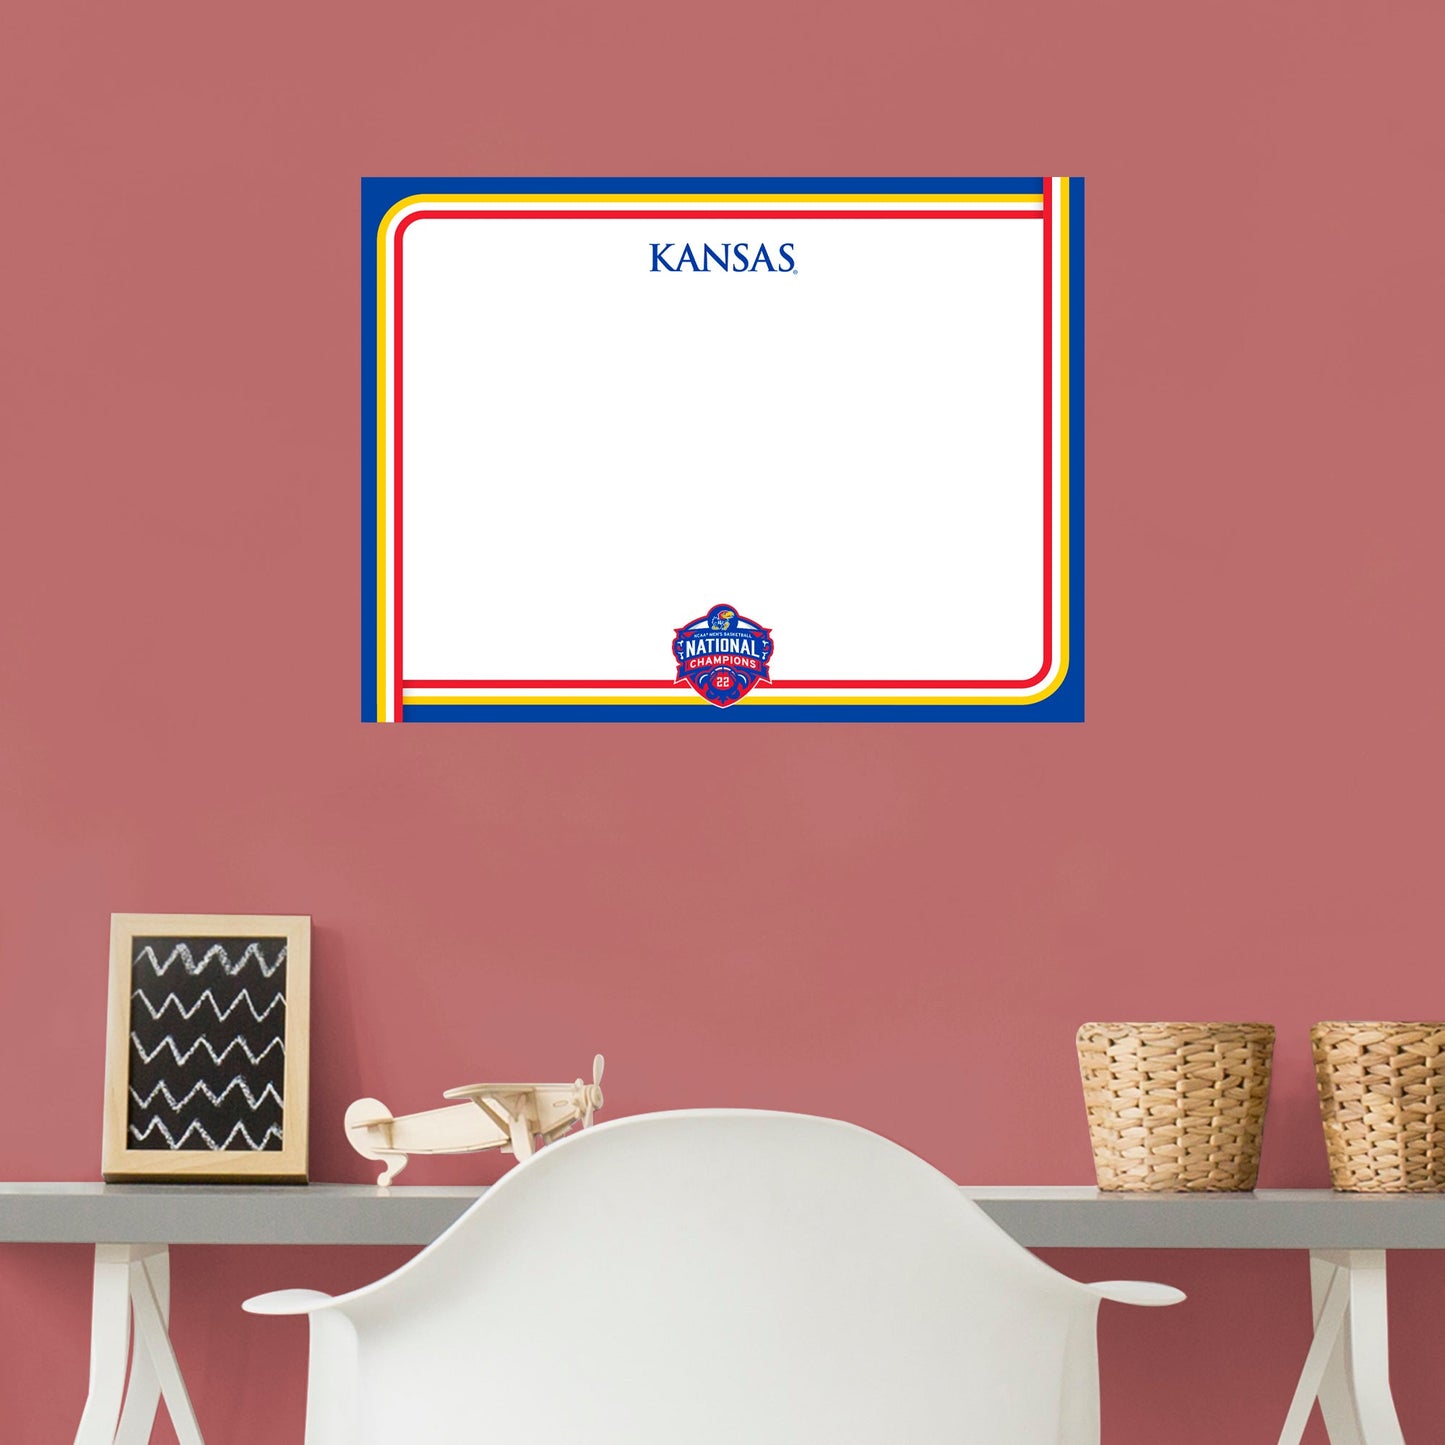 Kansas Jayhawks: 2022 Basketball Champions Dry Erase Whiteboard - Officially Licensed NCAA Removable Adhesive Decal